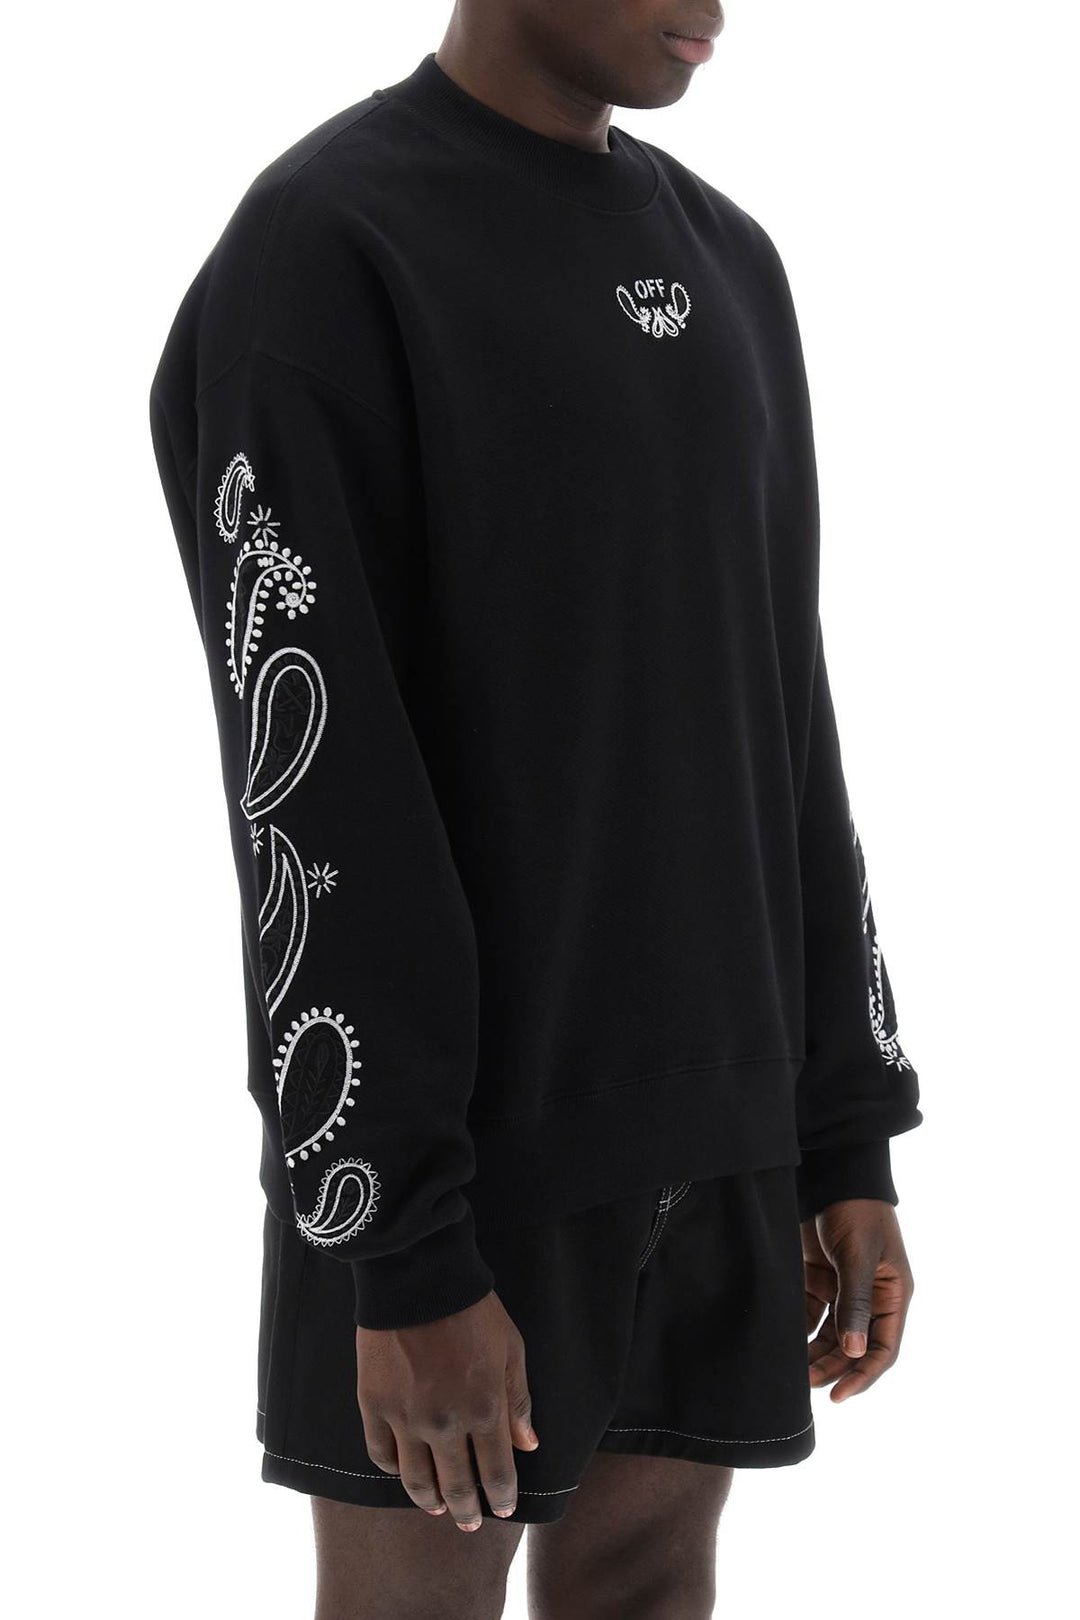 Off White Replace With Double Quotearrow Bandana Crewneck Sweat   Black